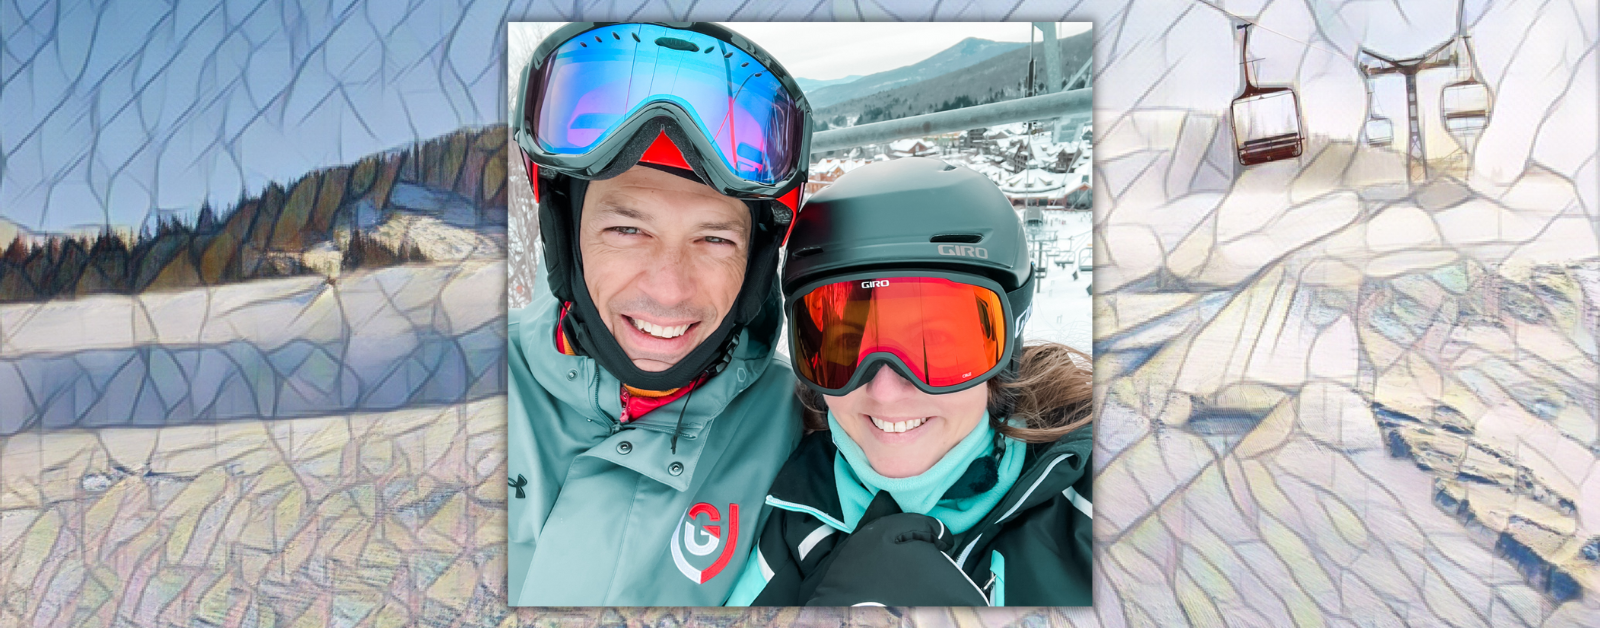 mosaic background with photo of Peter and Amy Julia smile for a selfie. They are wearing ski goggles and there is a snowy slope behind them